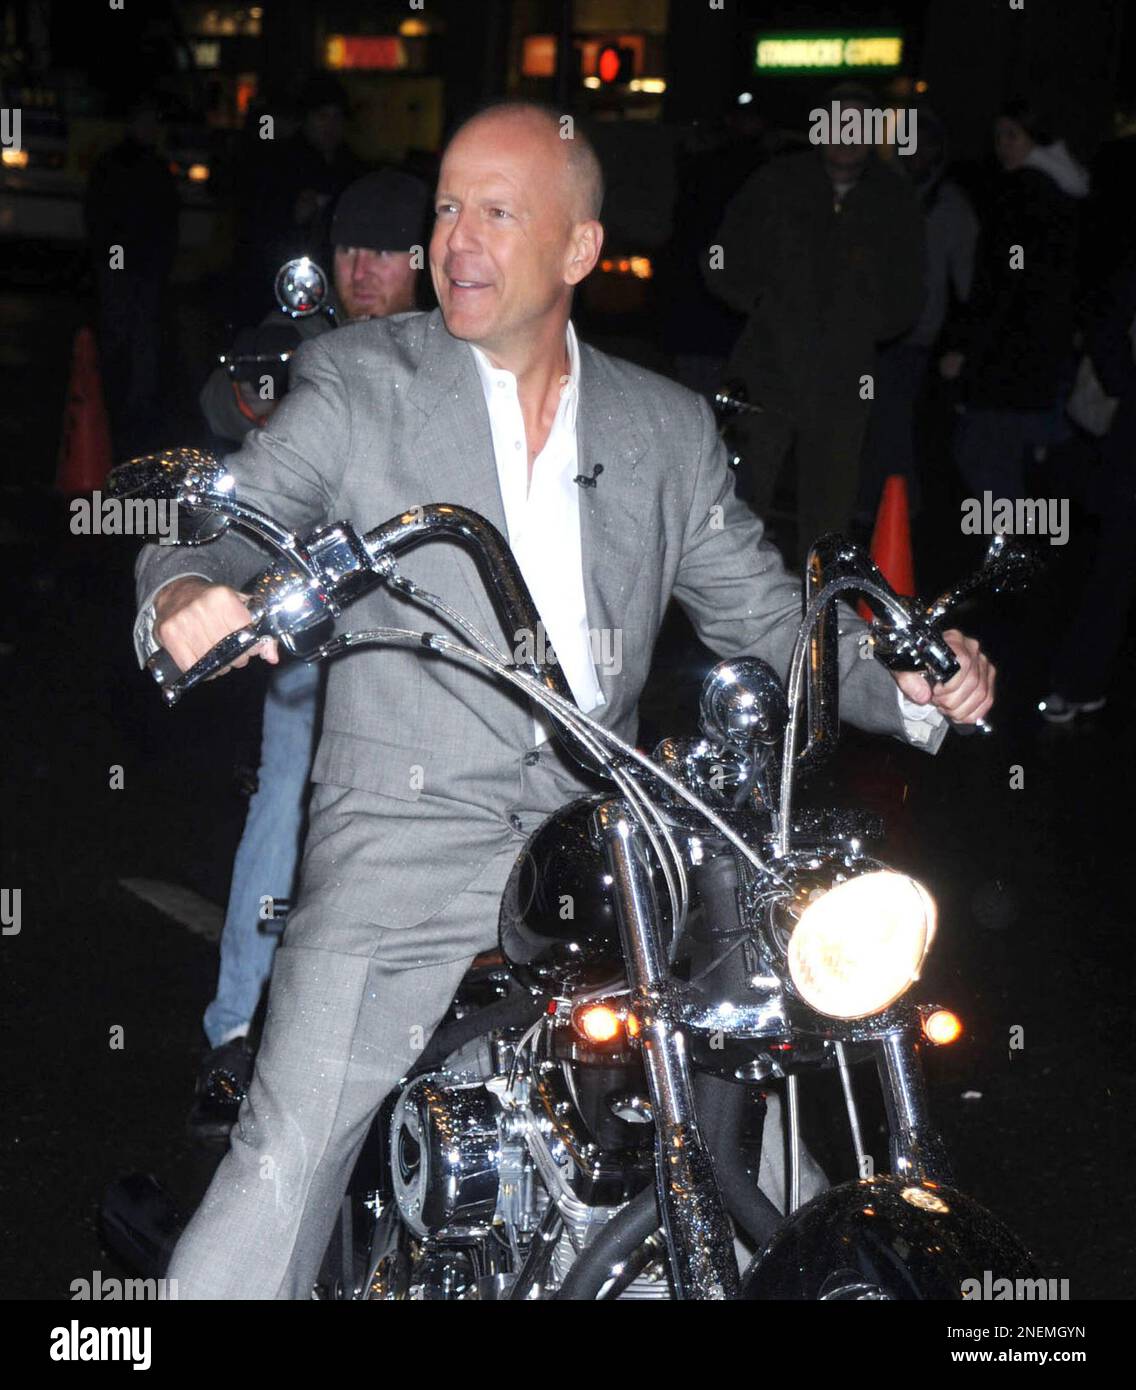 Manhattan, United States Of America. 17th Jan, 2008. NEW YORK - JANUARY 17, 2008: Actors Bruce Willis, Sylvester Stallone, the Teutul's ( America Chopper) and host David Letterman all show up on Chopper Motorcycles for the taping of 'Late Show With David Letterman' at the Ed Sullivan Theater January 17, 2008 in New York City. People: Bruce Willis www.StormsMediaGroup.com Credit: Storms Media Group/Alamy Live News Stock Photo